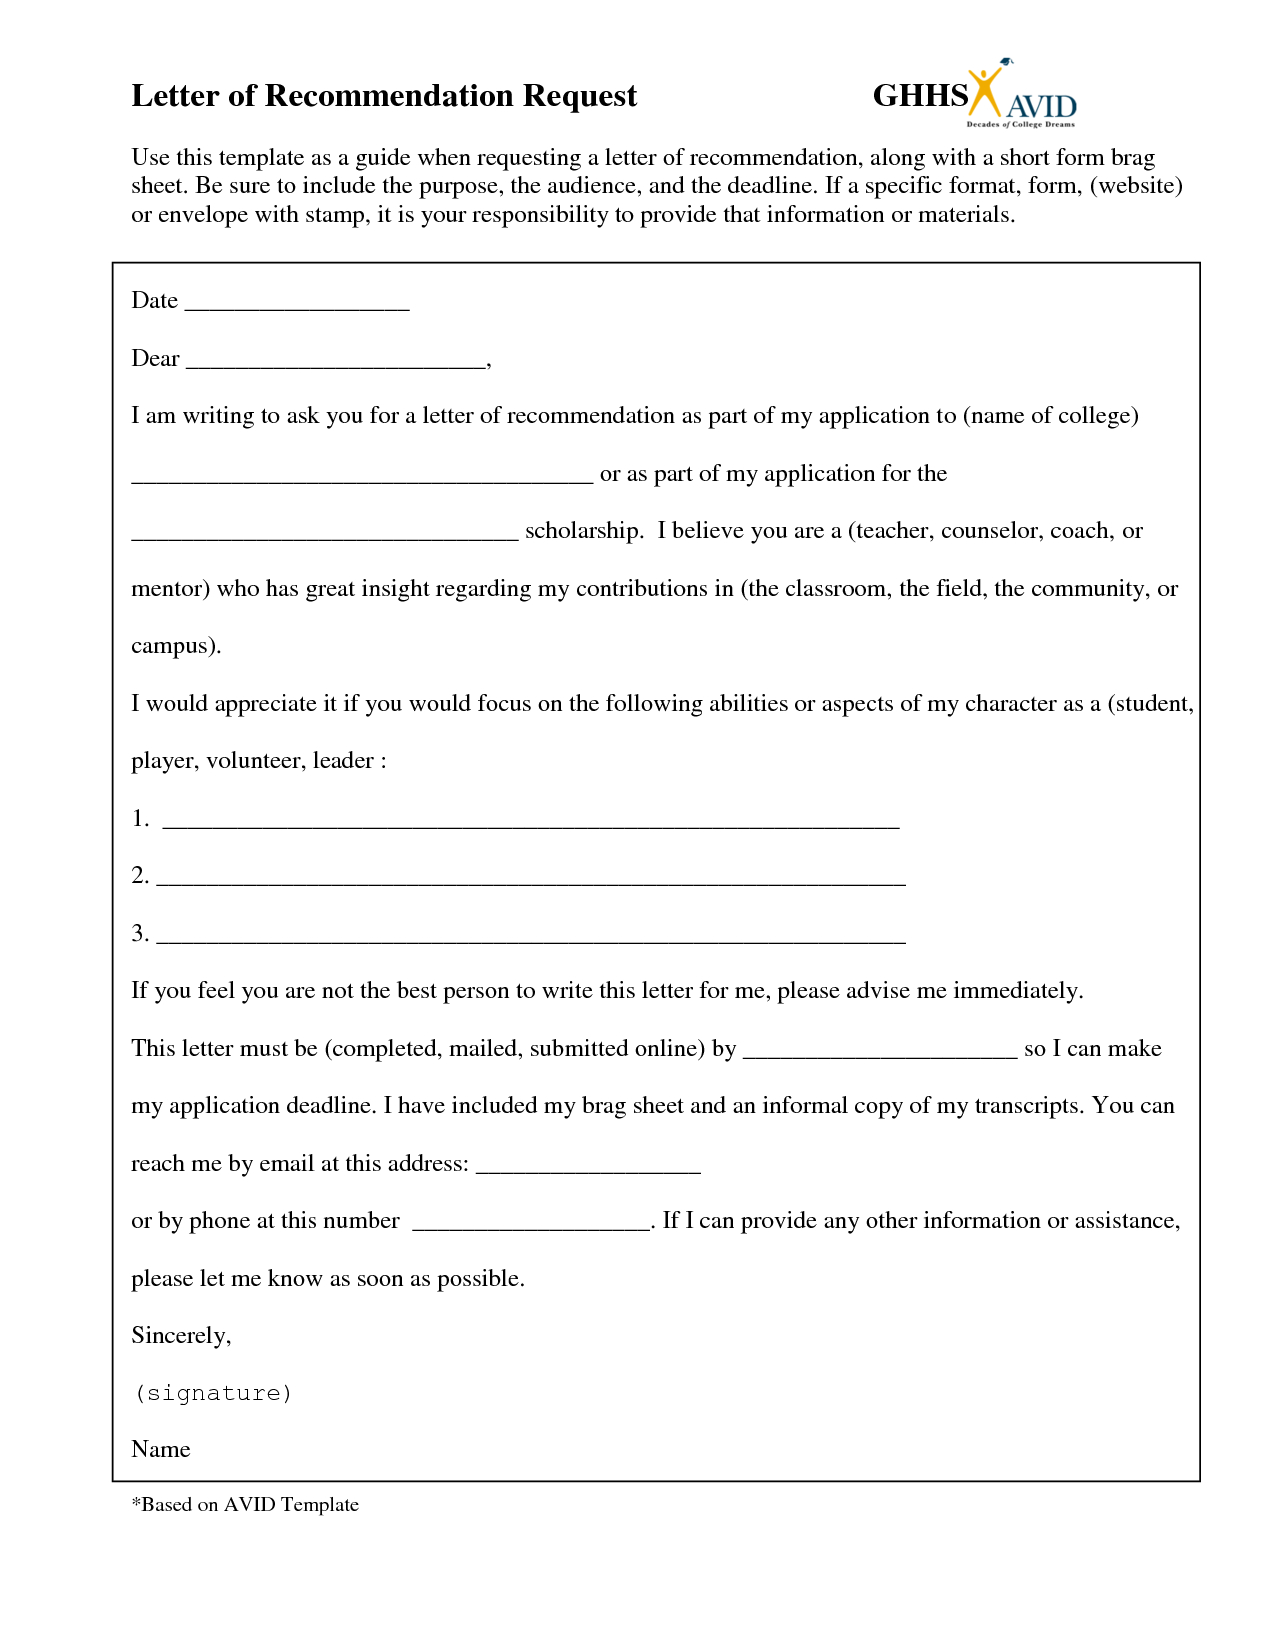 Request For Letter Of Reccomendation Template within proportions 1275 X 1650